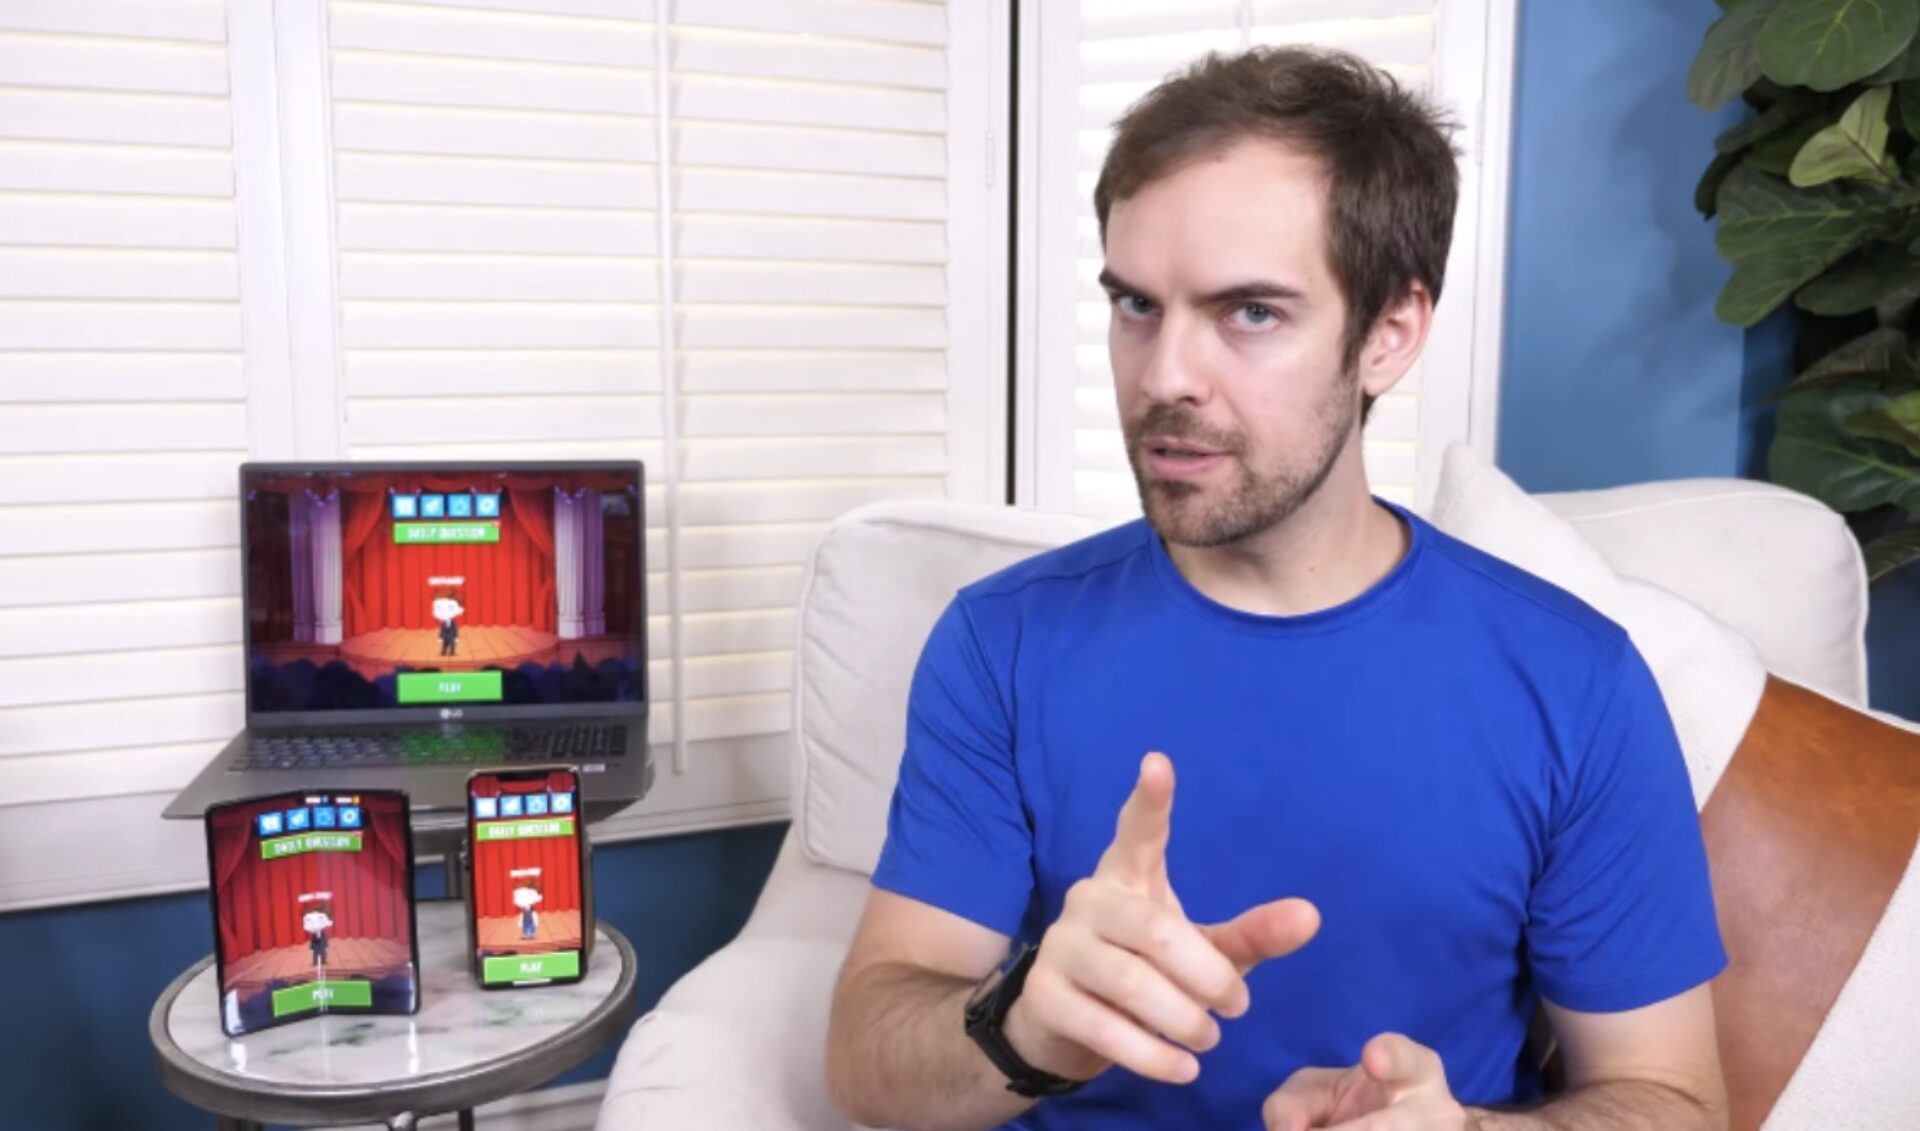 Jacksfilms urges fans to ‘Be Funny Now’ with new party game